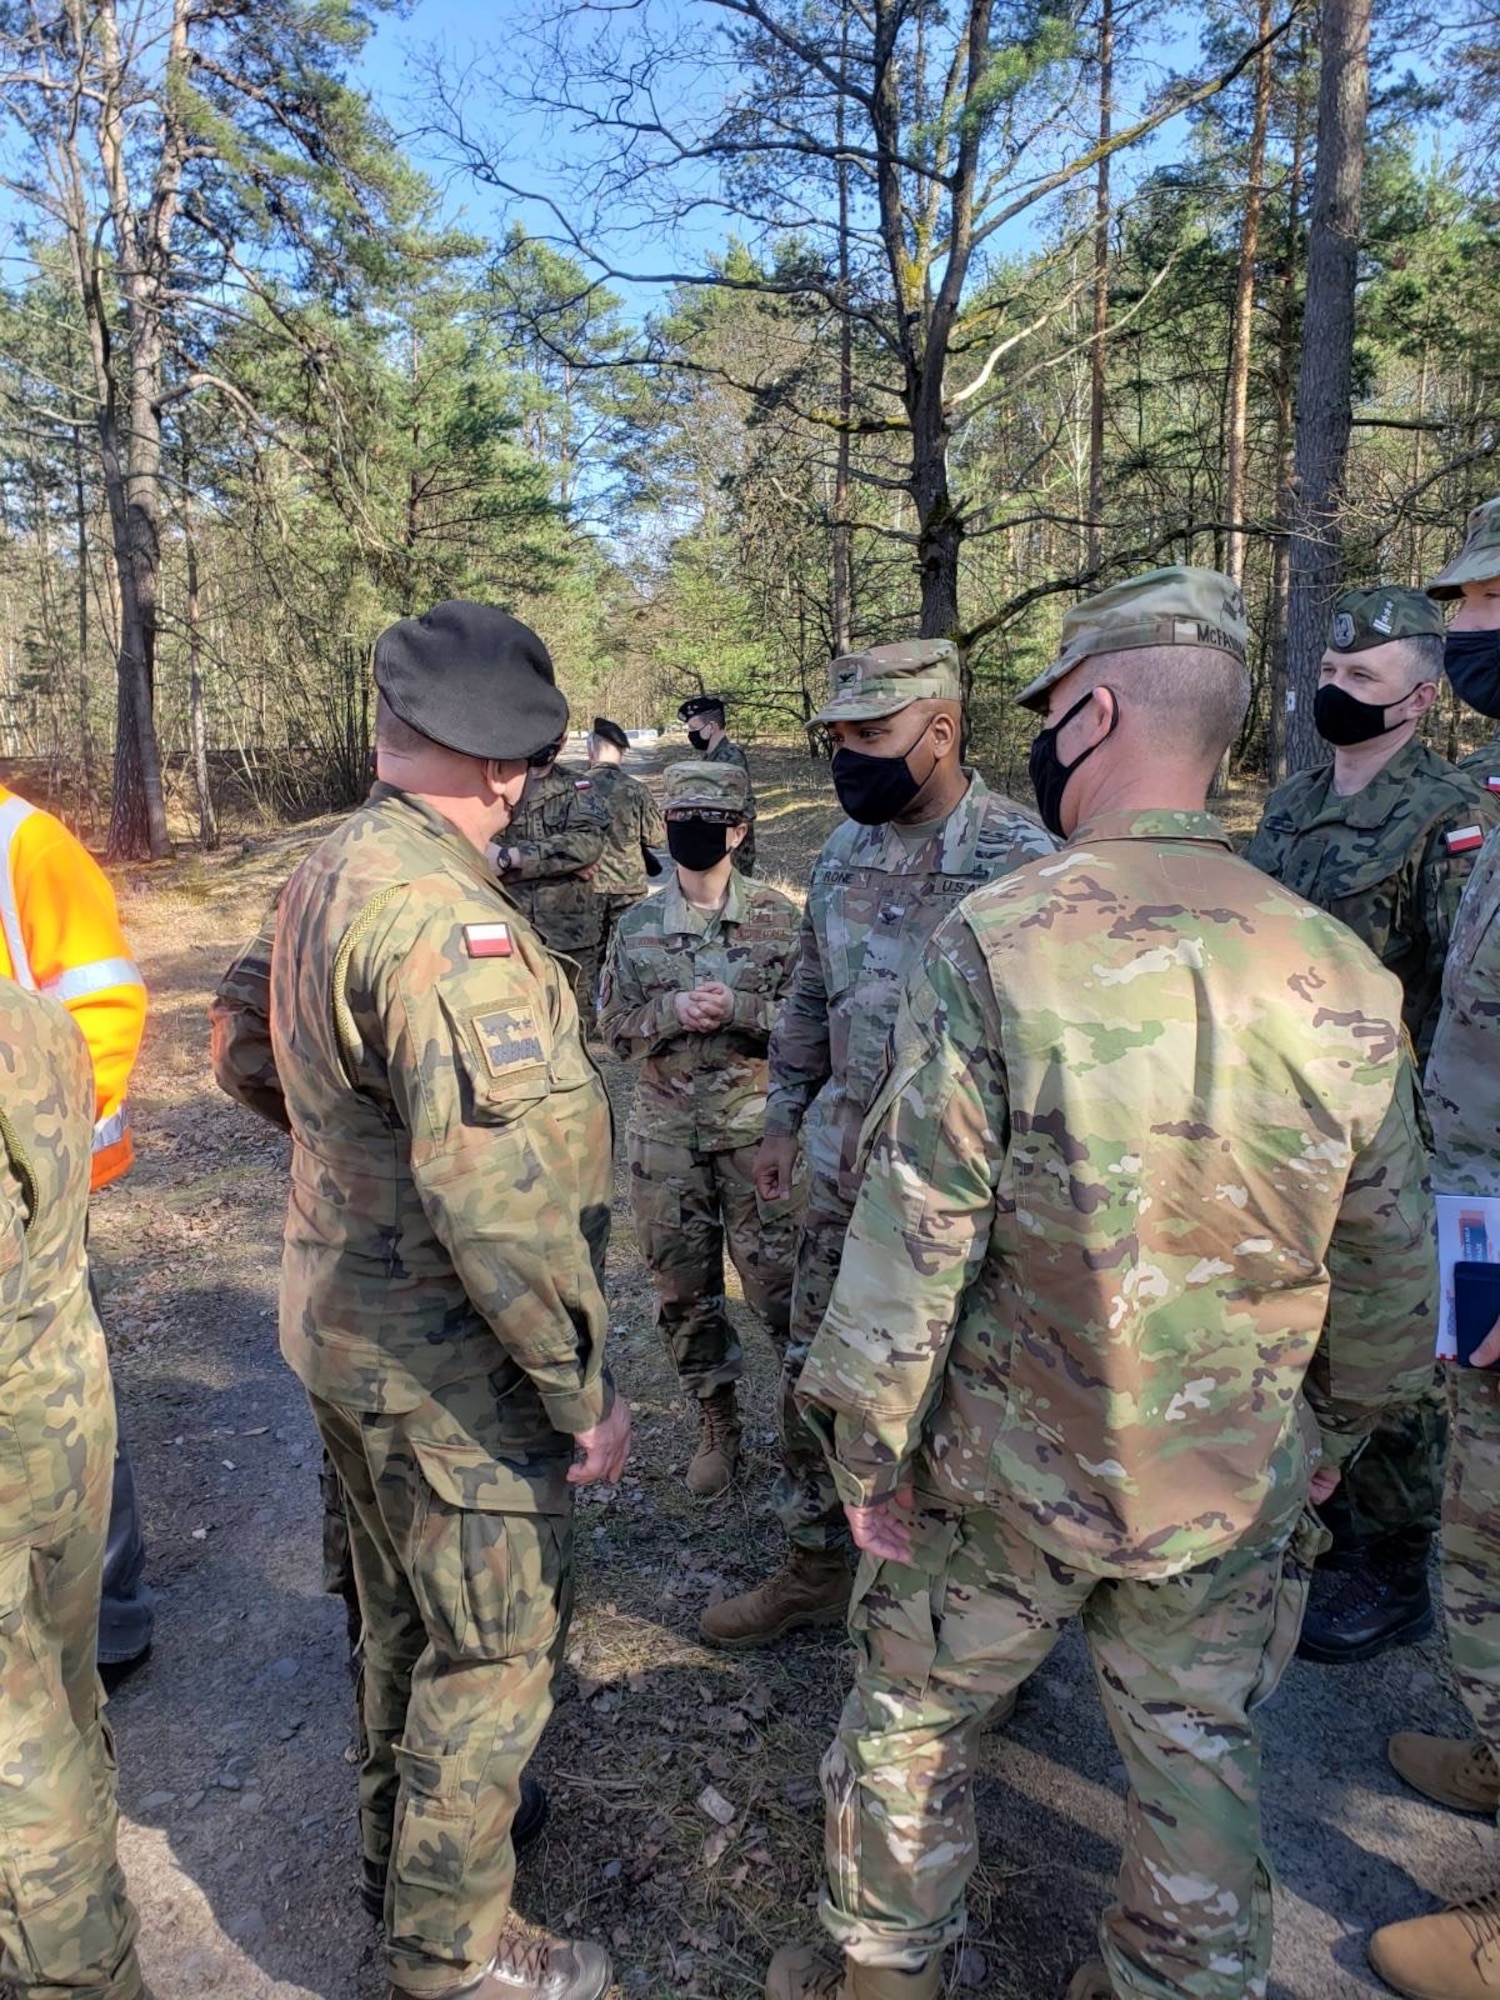 Tech Sgt. Roza Kowal (middle) provides language and culture support between U.S. Army and Polish forces during the 1/1 CD Brigade Combat Team deployment to Europe.